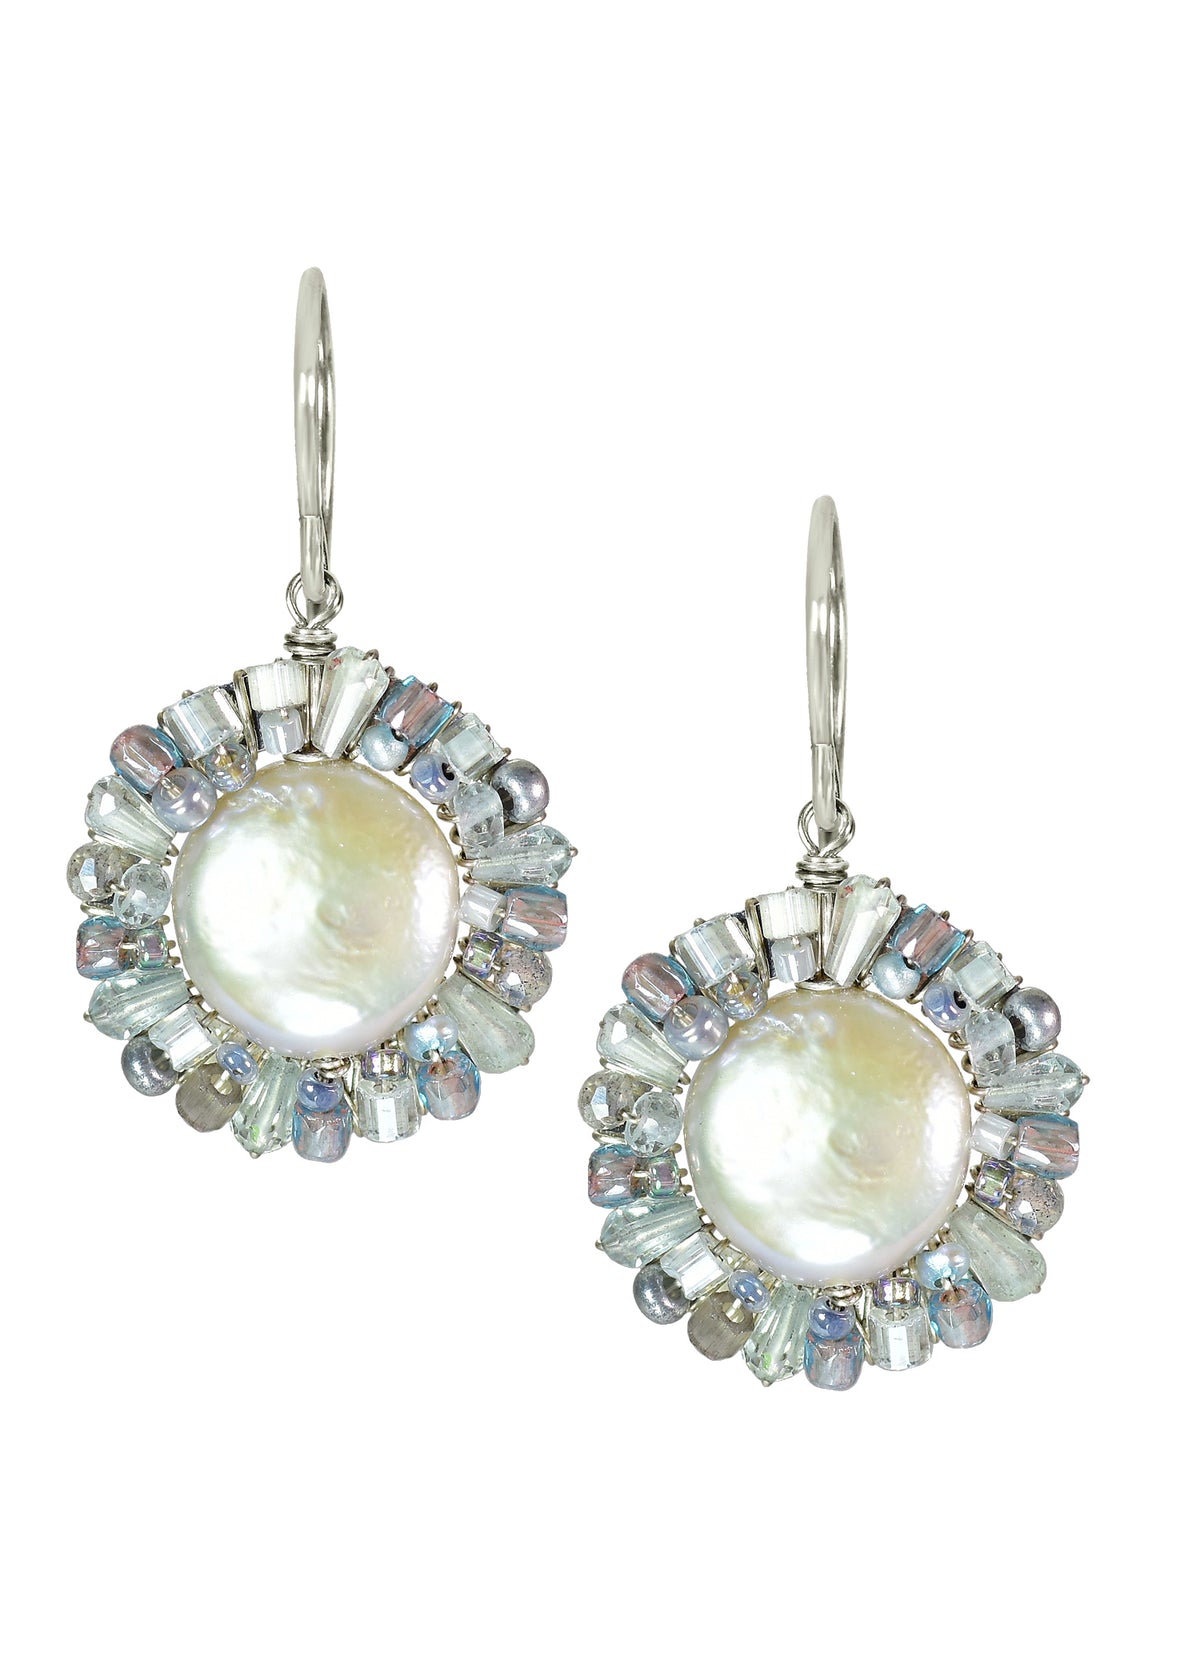 Freshwater pearl Aquamarine Labradorite Seed beads Sterling silver Earrings measure 1-1/8&quot; in length (including the ear wires) and 5/8&quot; in width Handmade in our Los Angeles studio